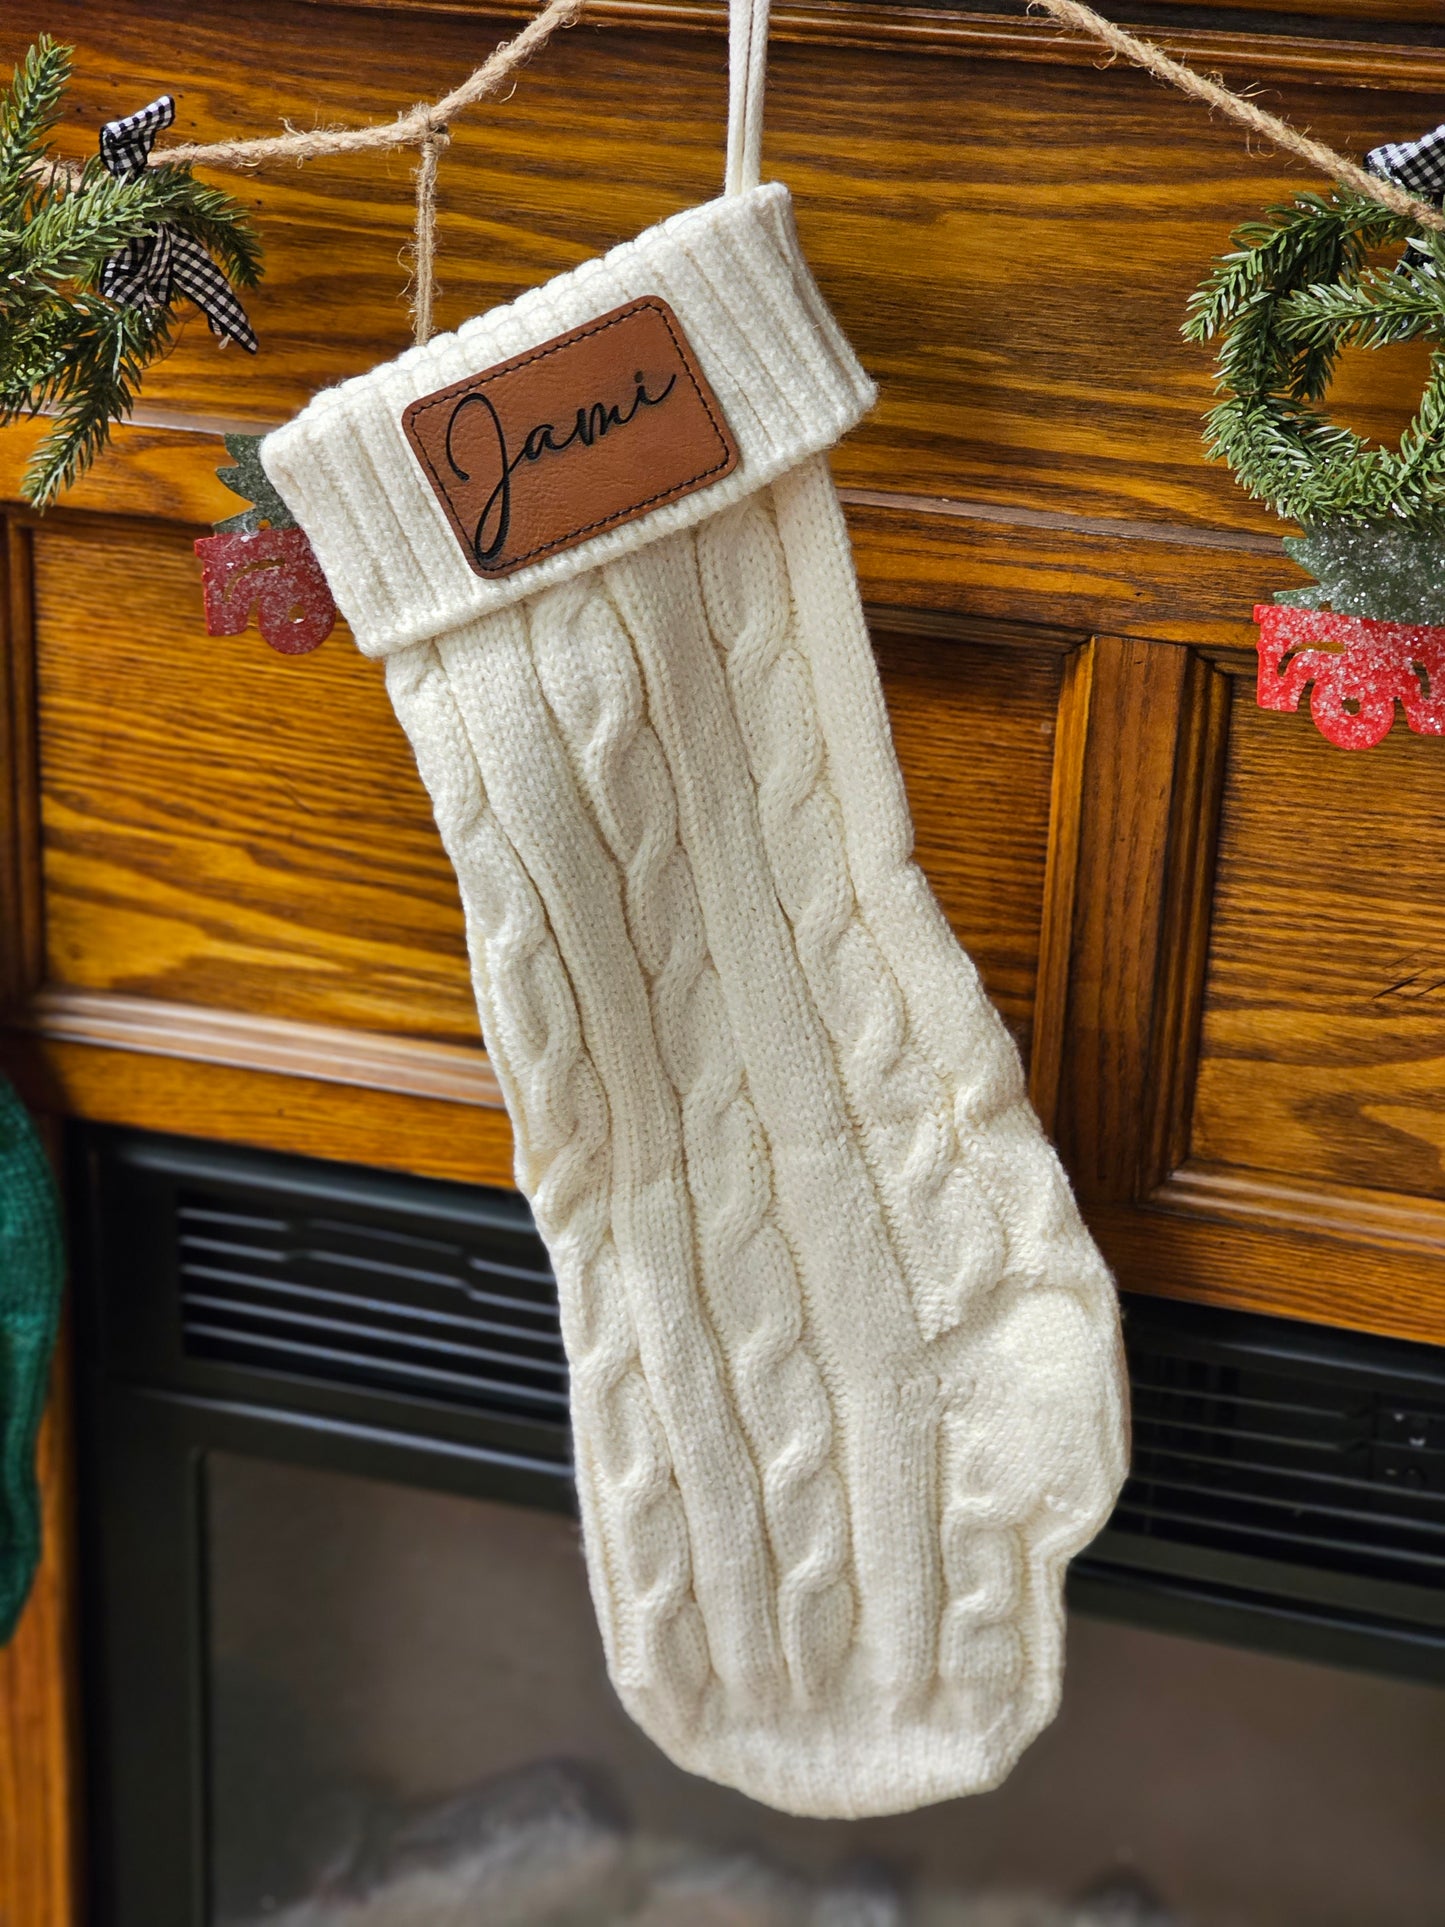 Personalized Stockings